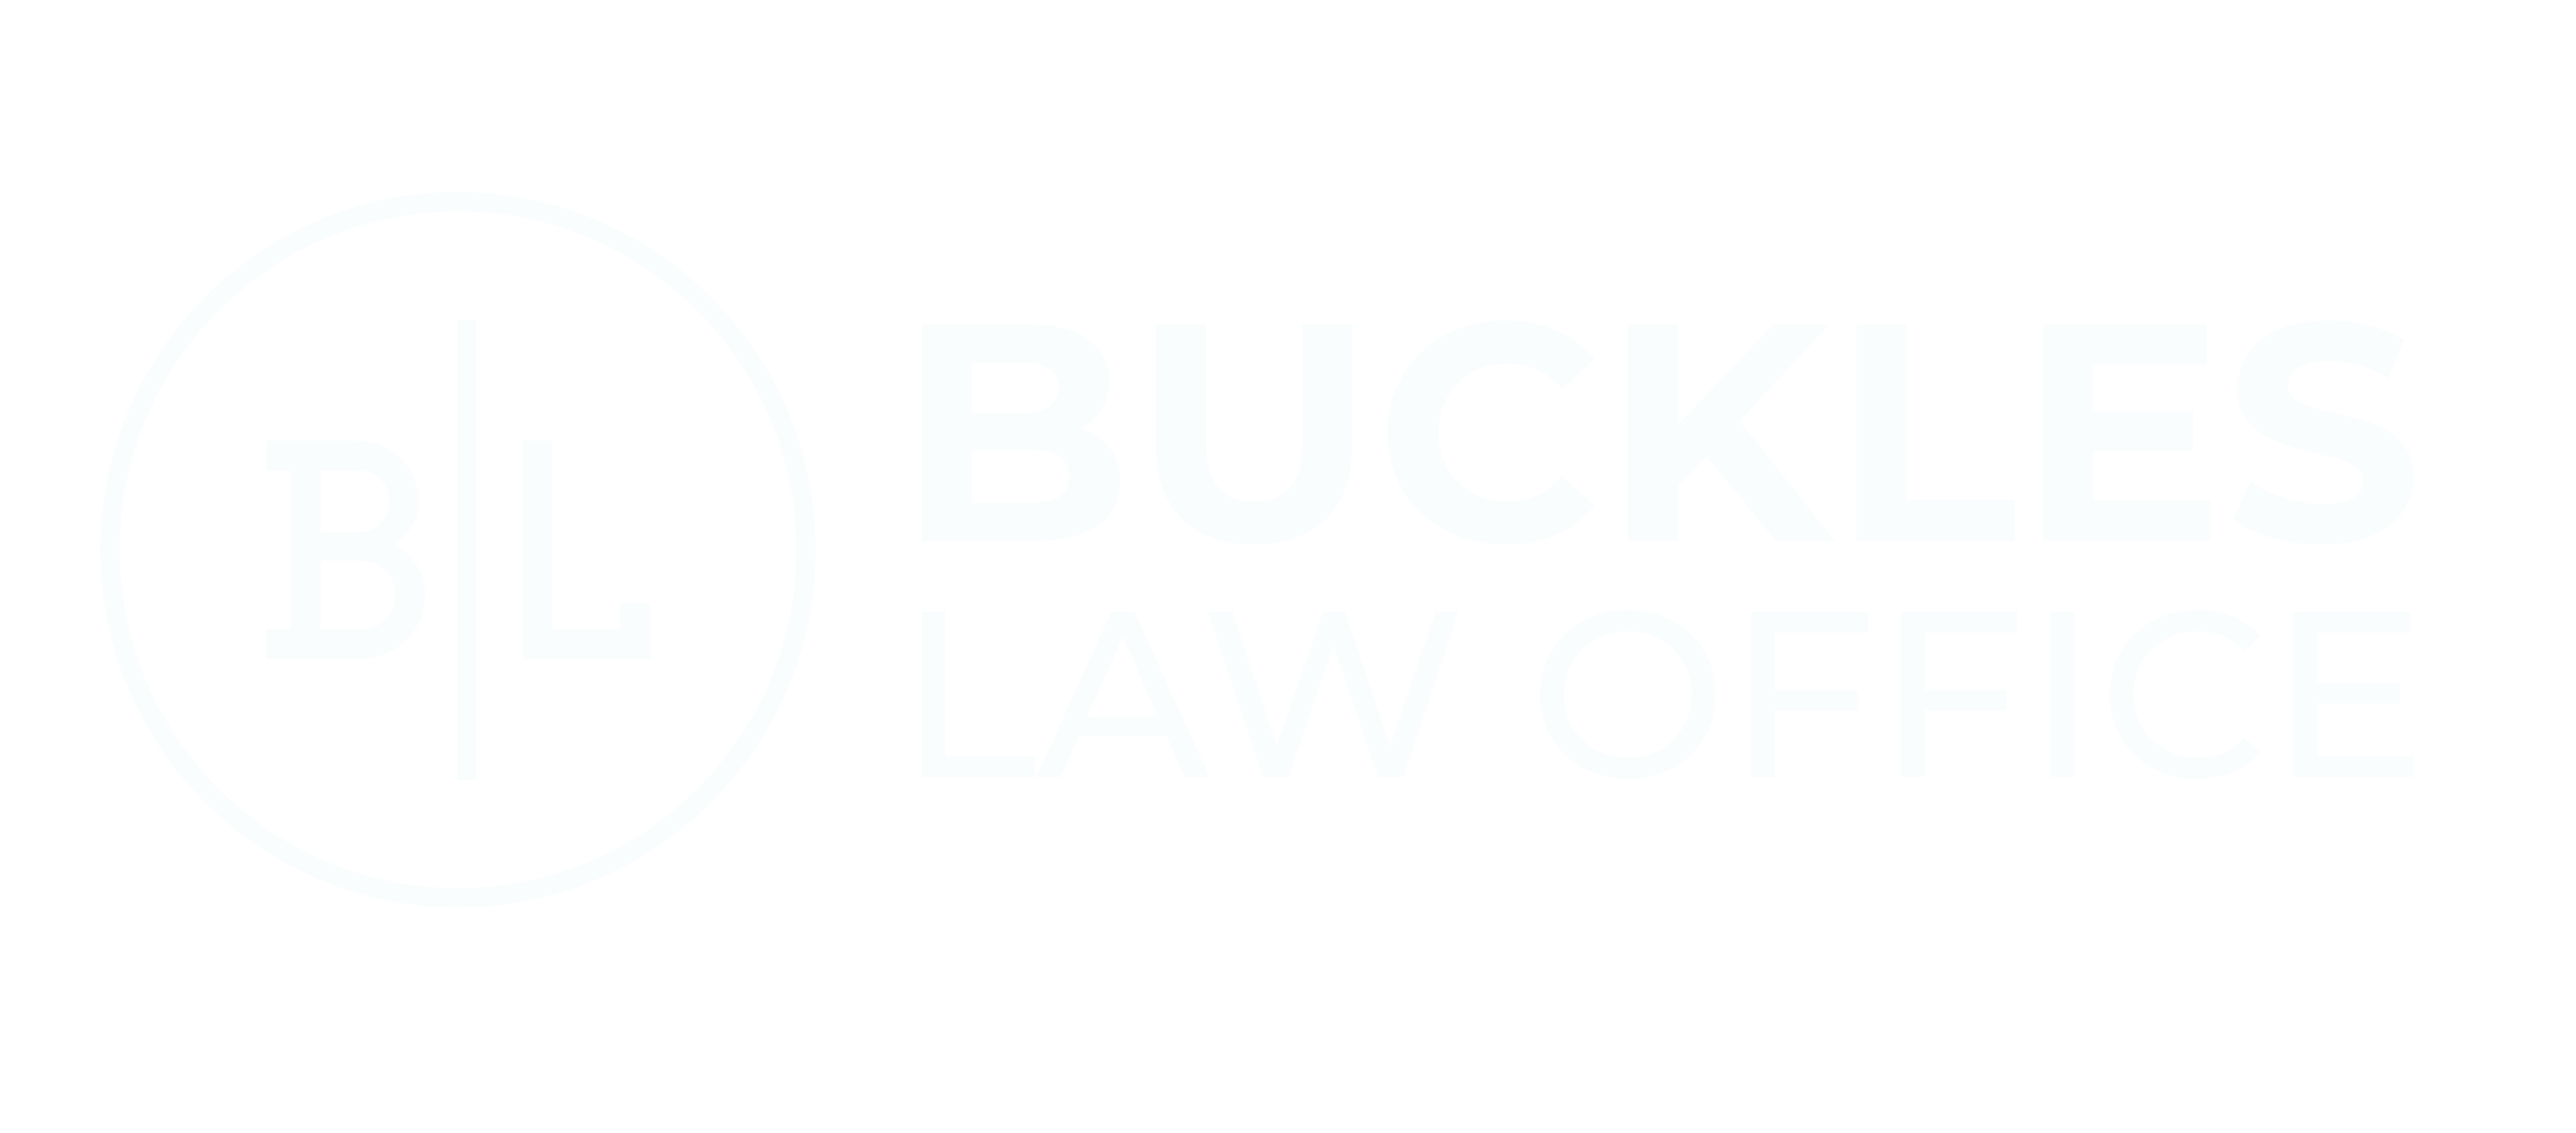 Buckles Law Office